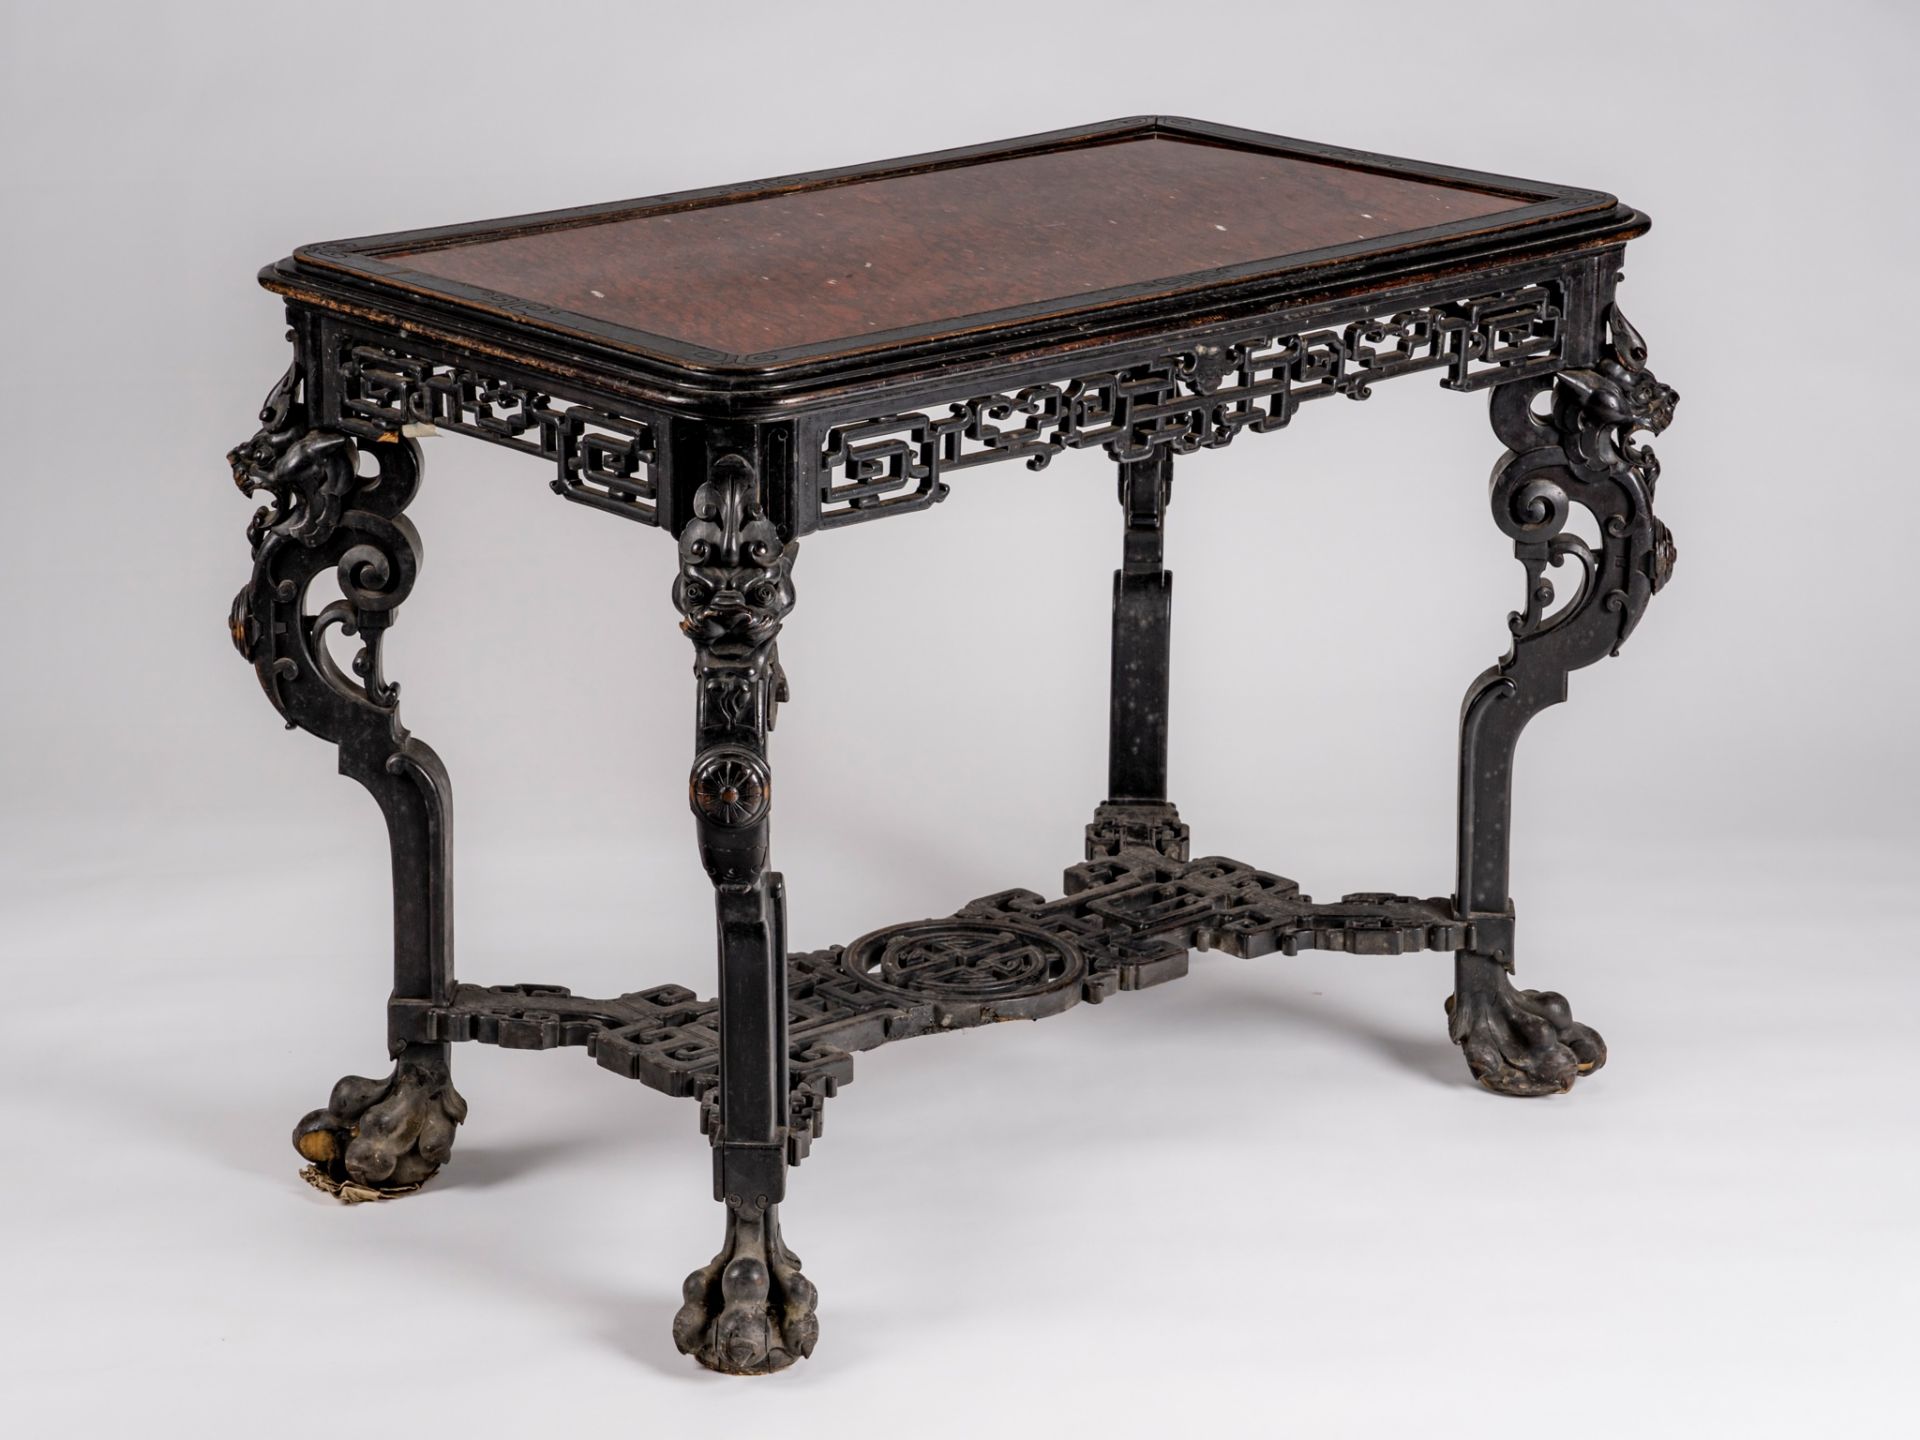 A LACQUERED HONGMU WOOD AND STONE CONSOLE TABLE, QING DYNASTY